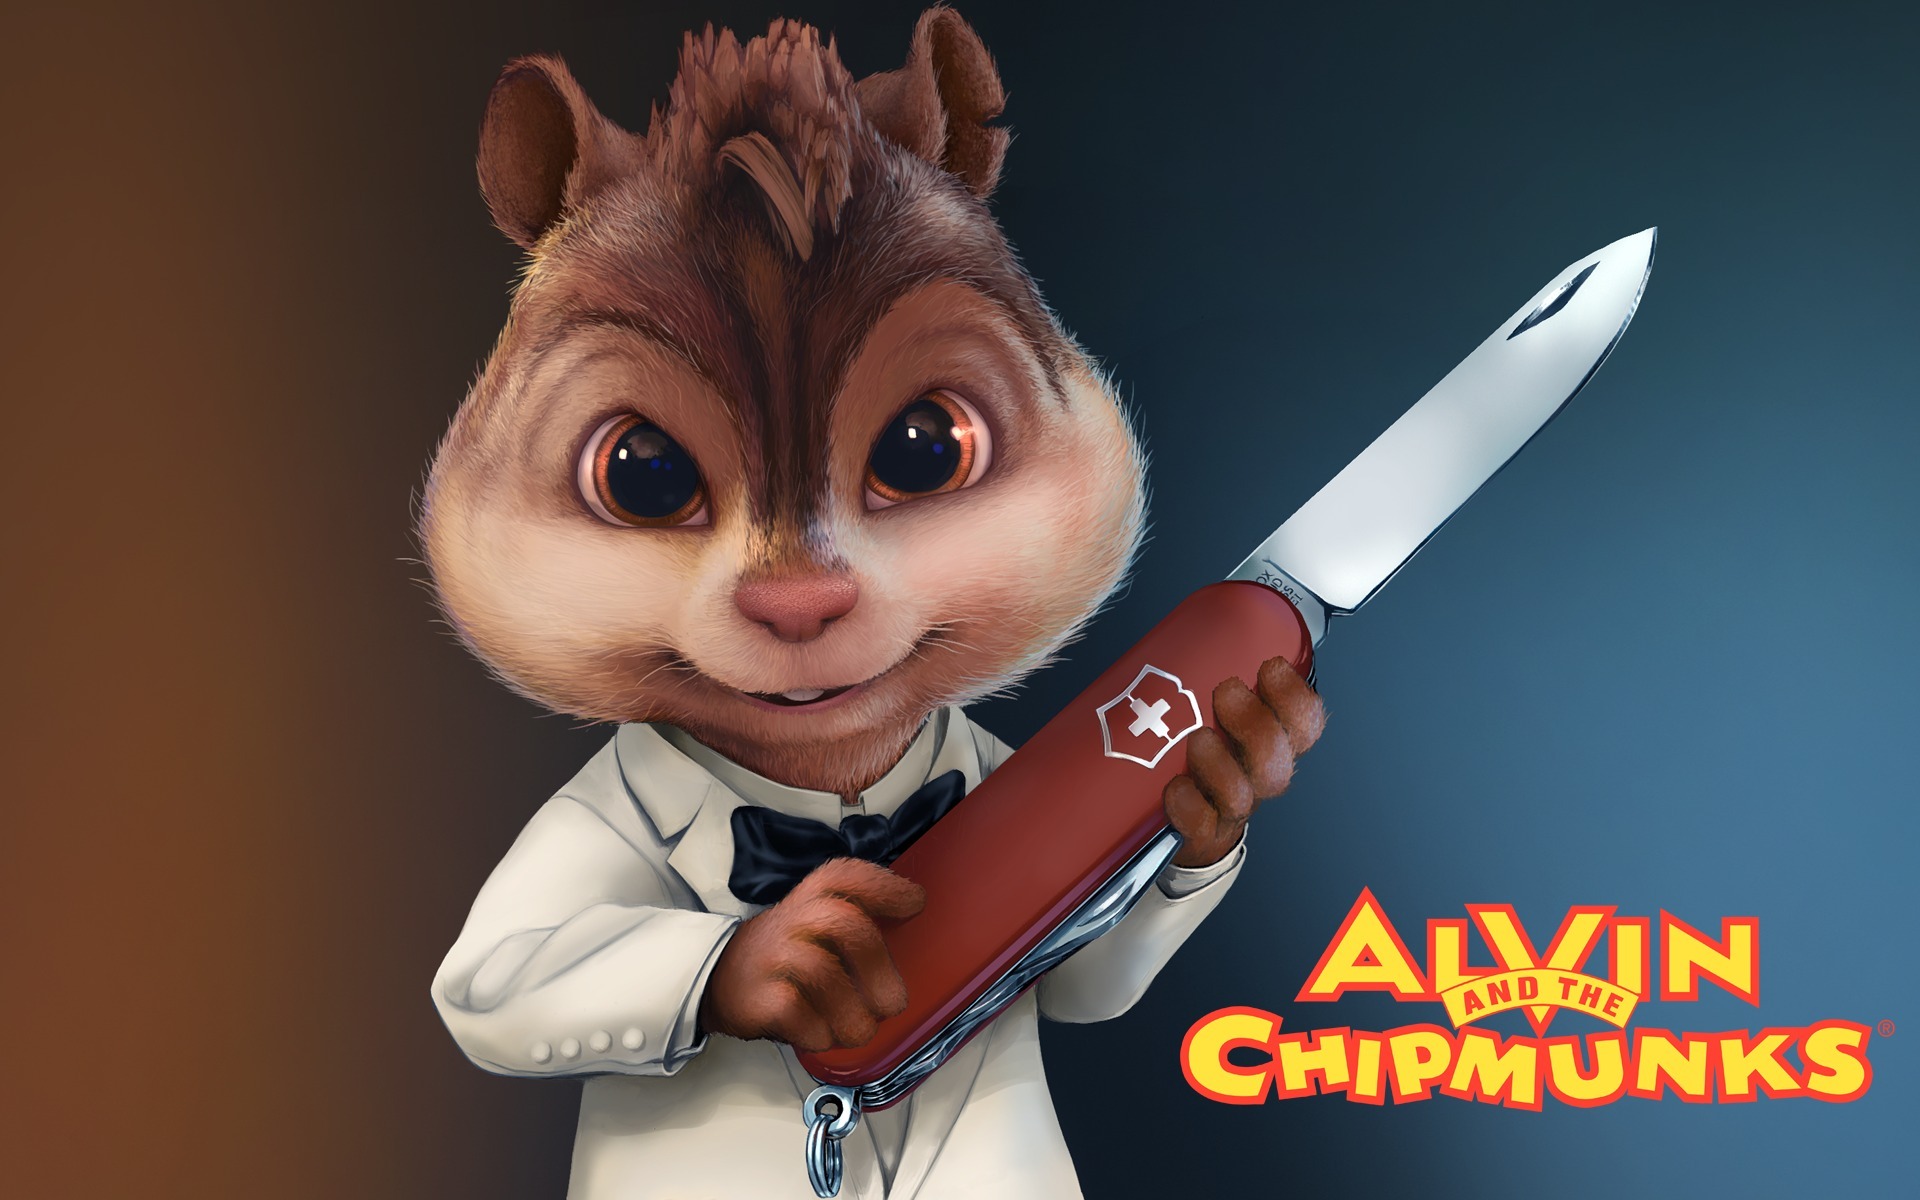 Wallpaper ID 470598  Movie Alvin and the Chipmunks Phone Wallpaper   720x1280 free download